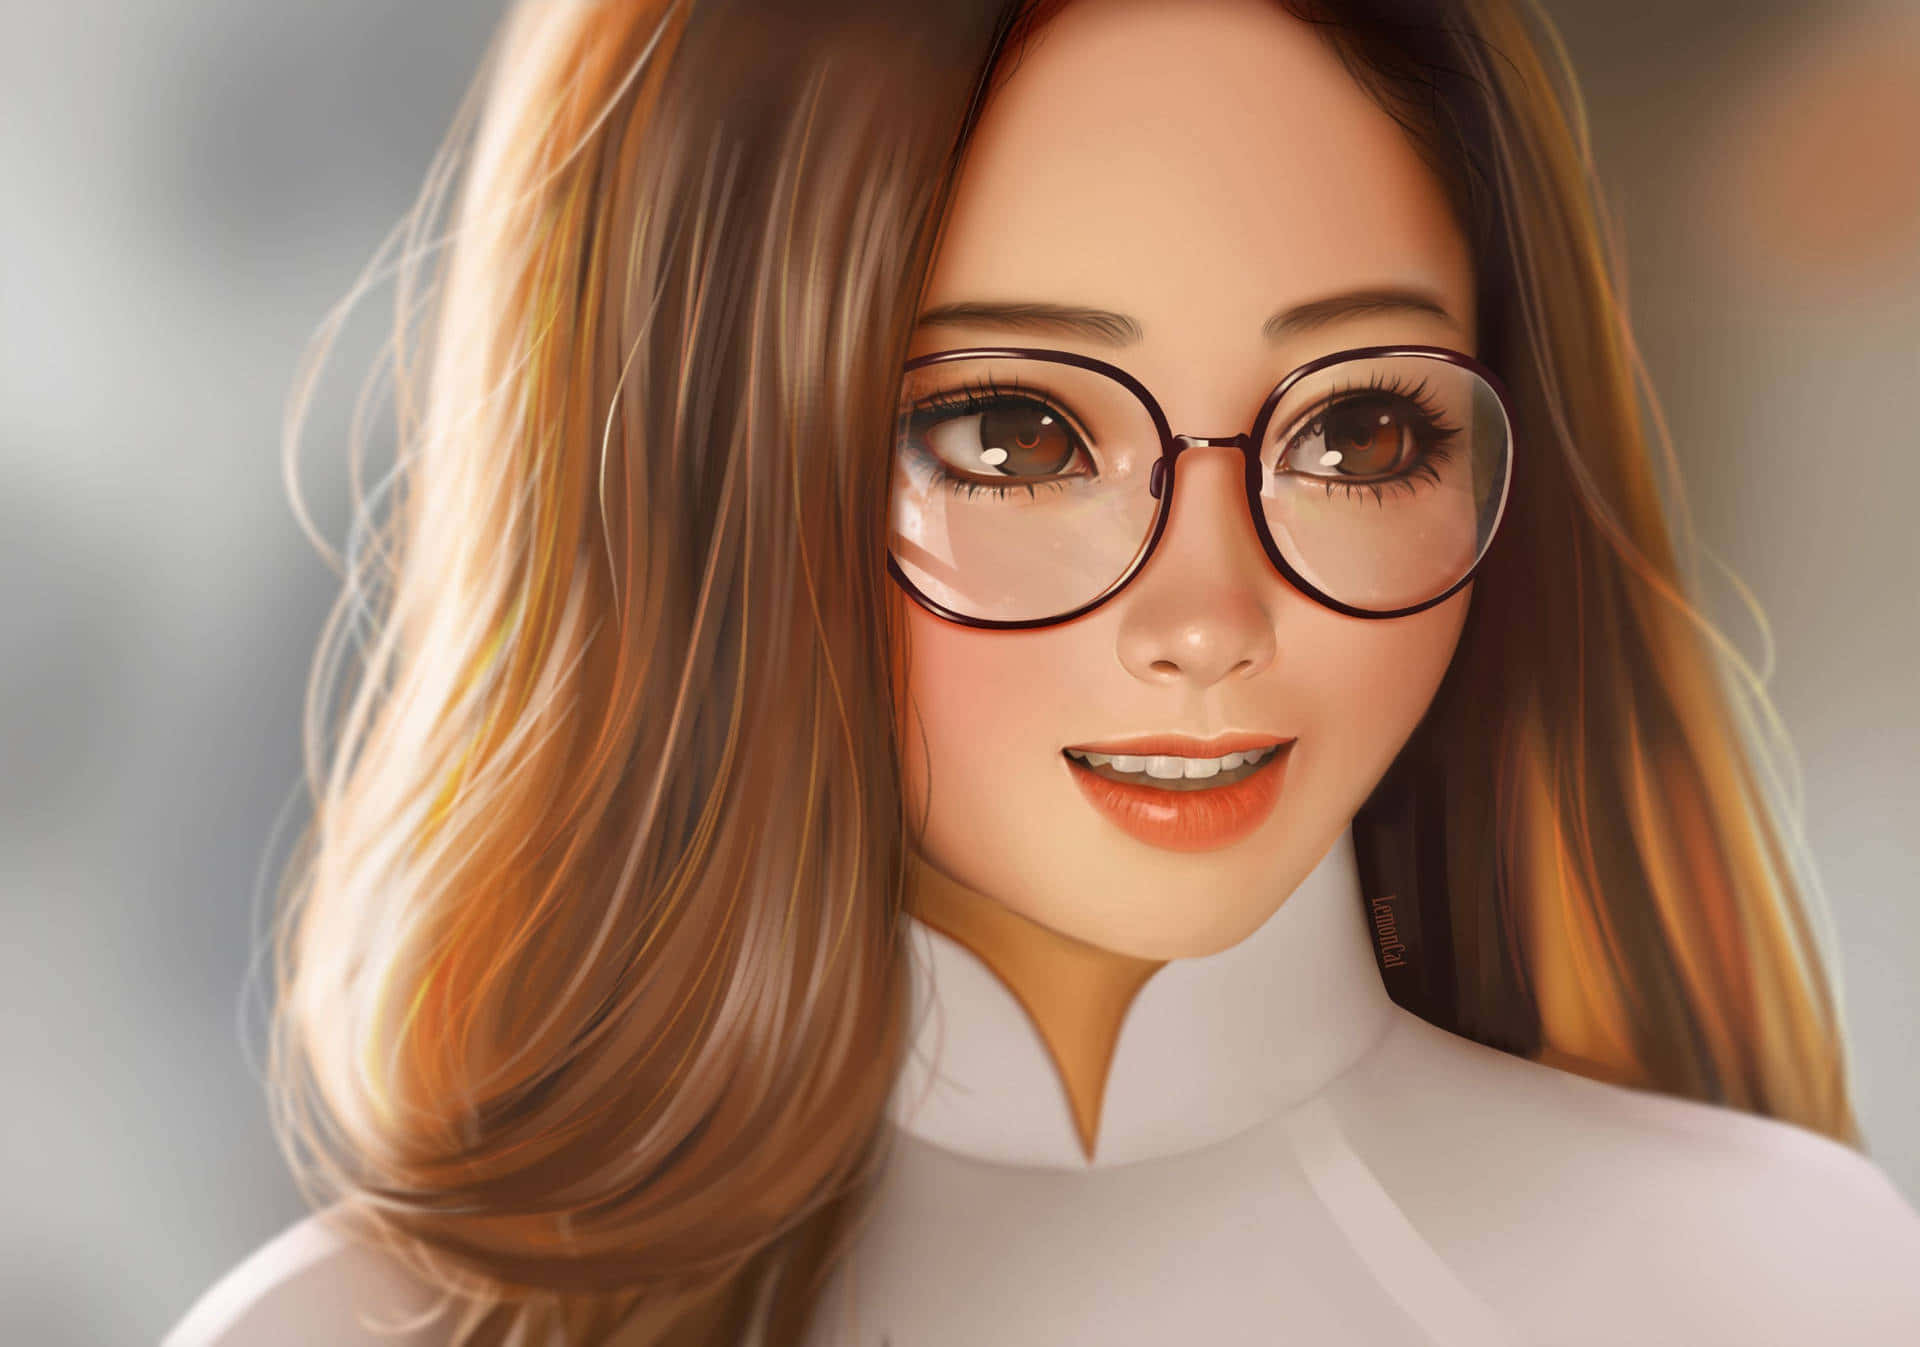 Pretty Girl With Glasses And Large Eyes Background